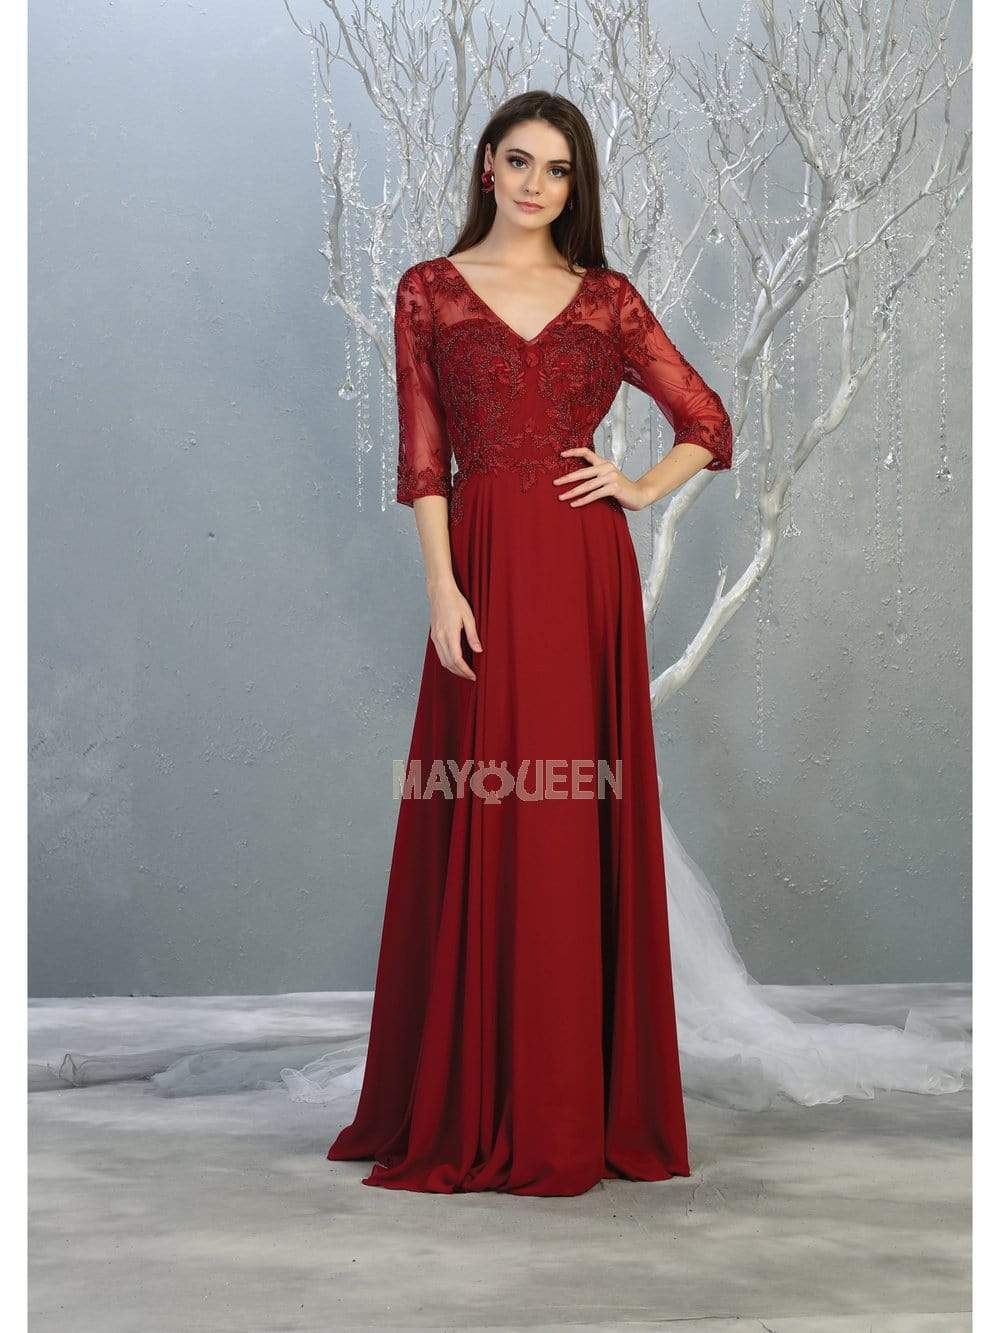 May Queen - RQ7820 Bead Embellished V-Neck A-Line Dress